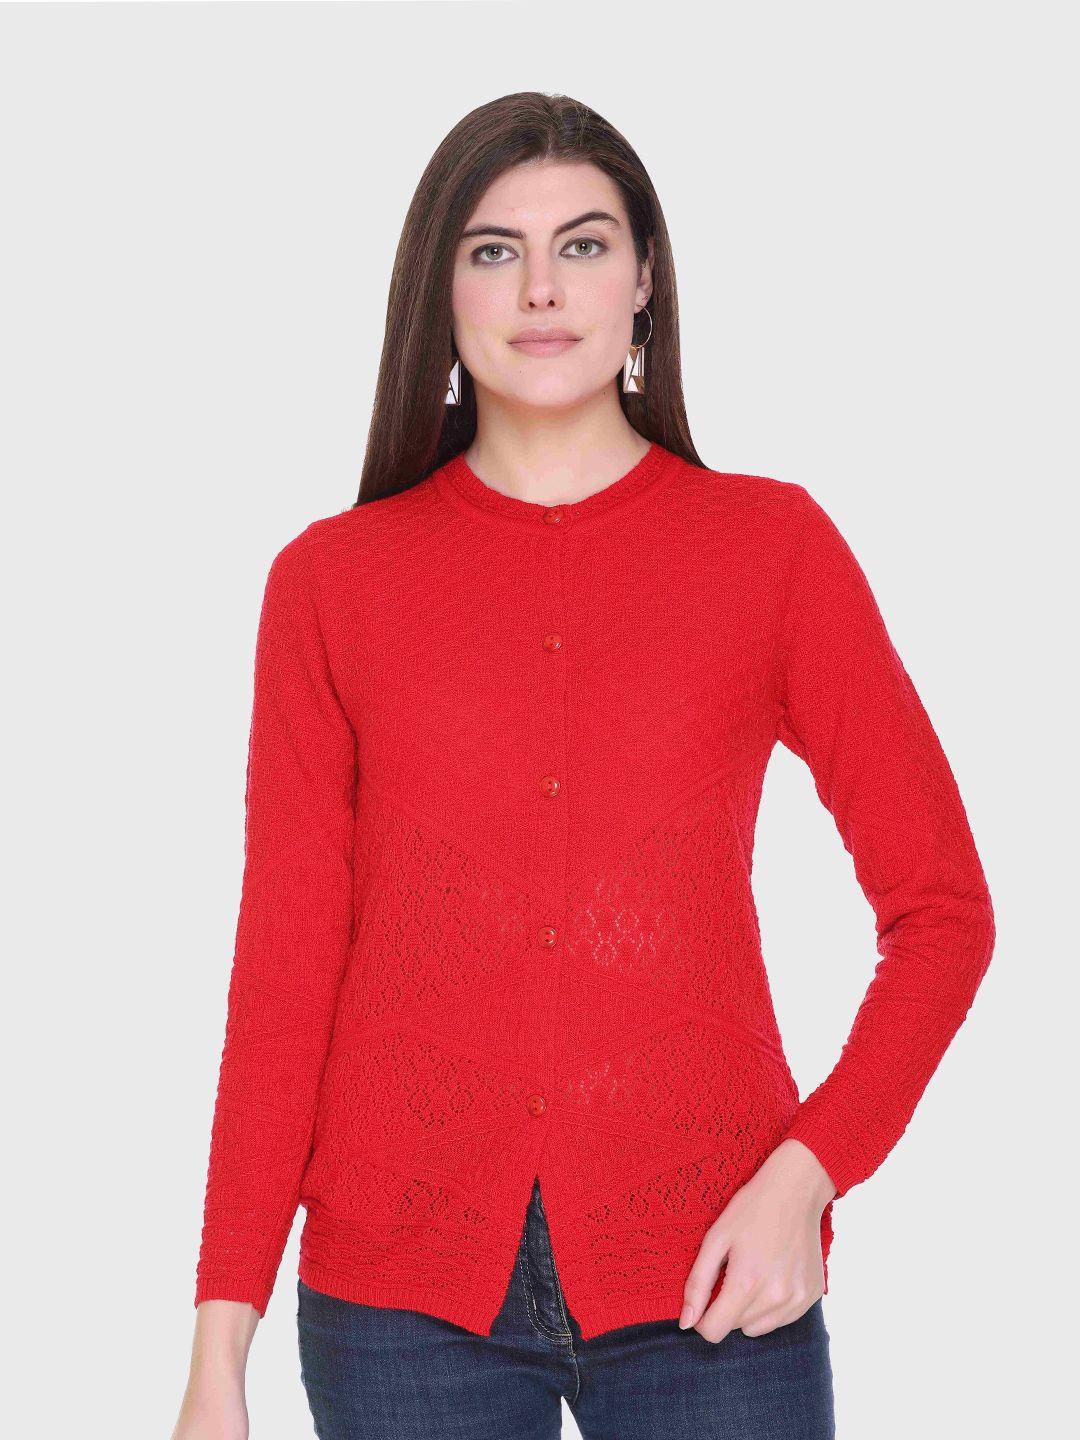 godfrey women red cable knit cardigan